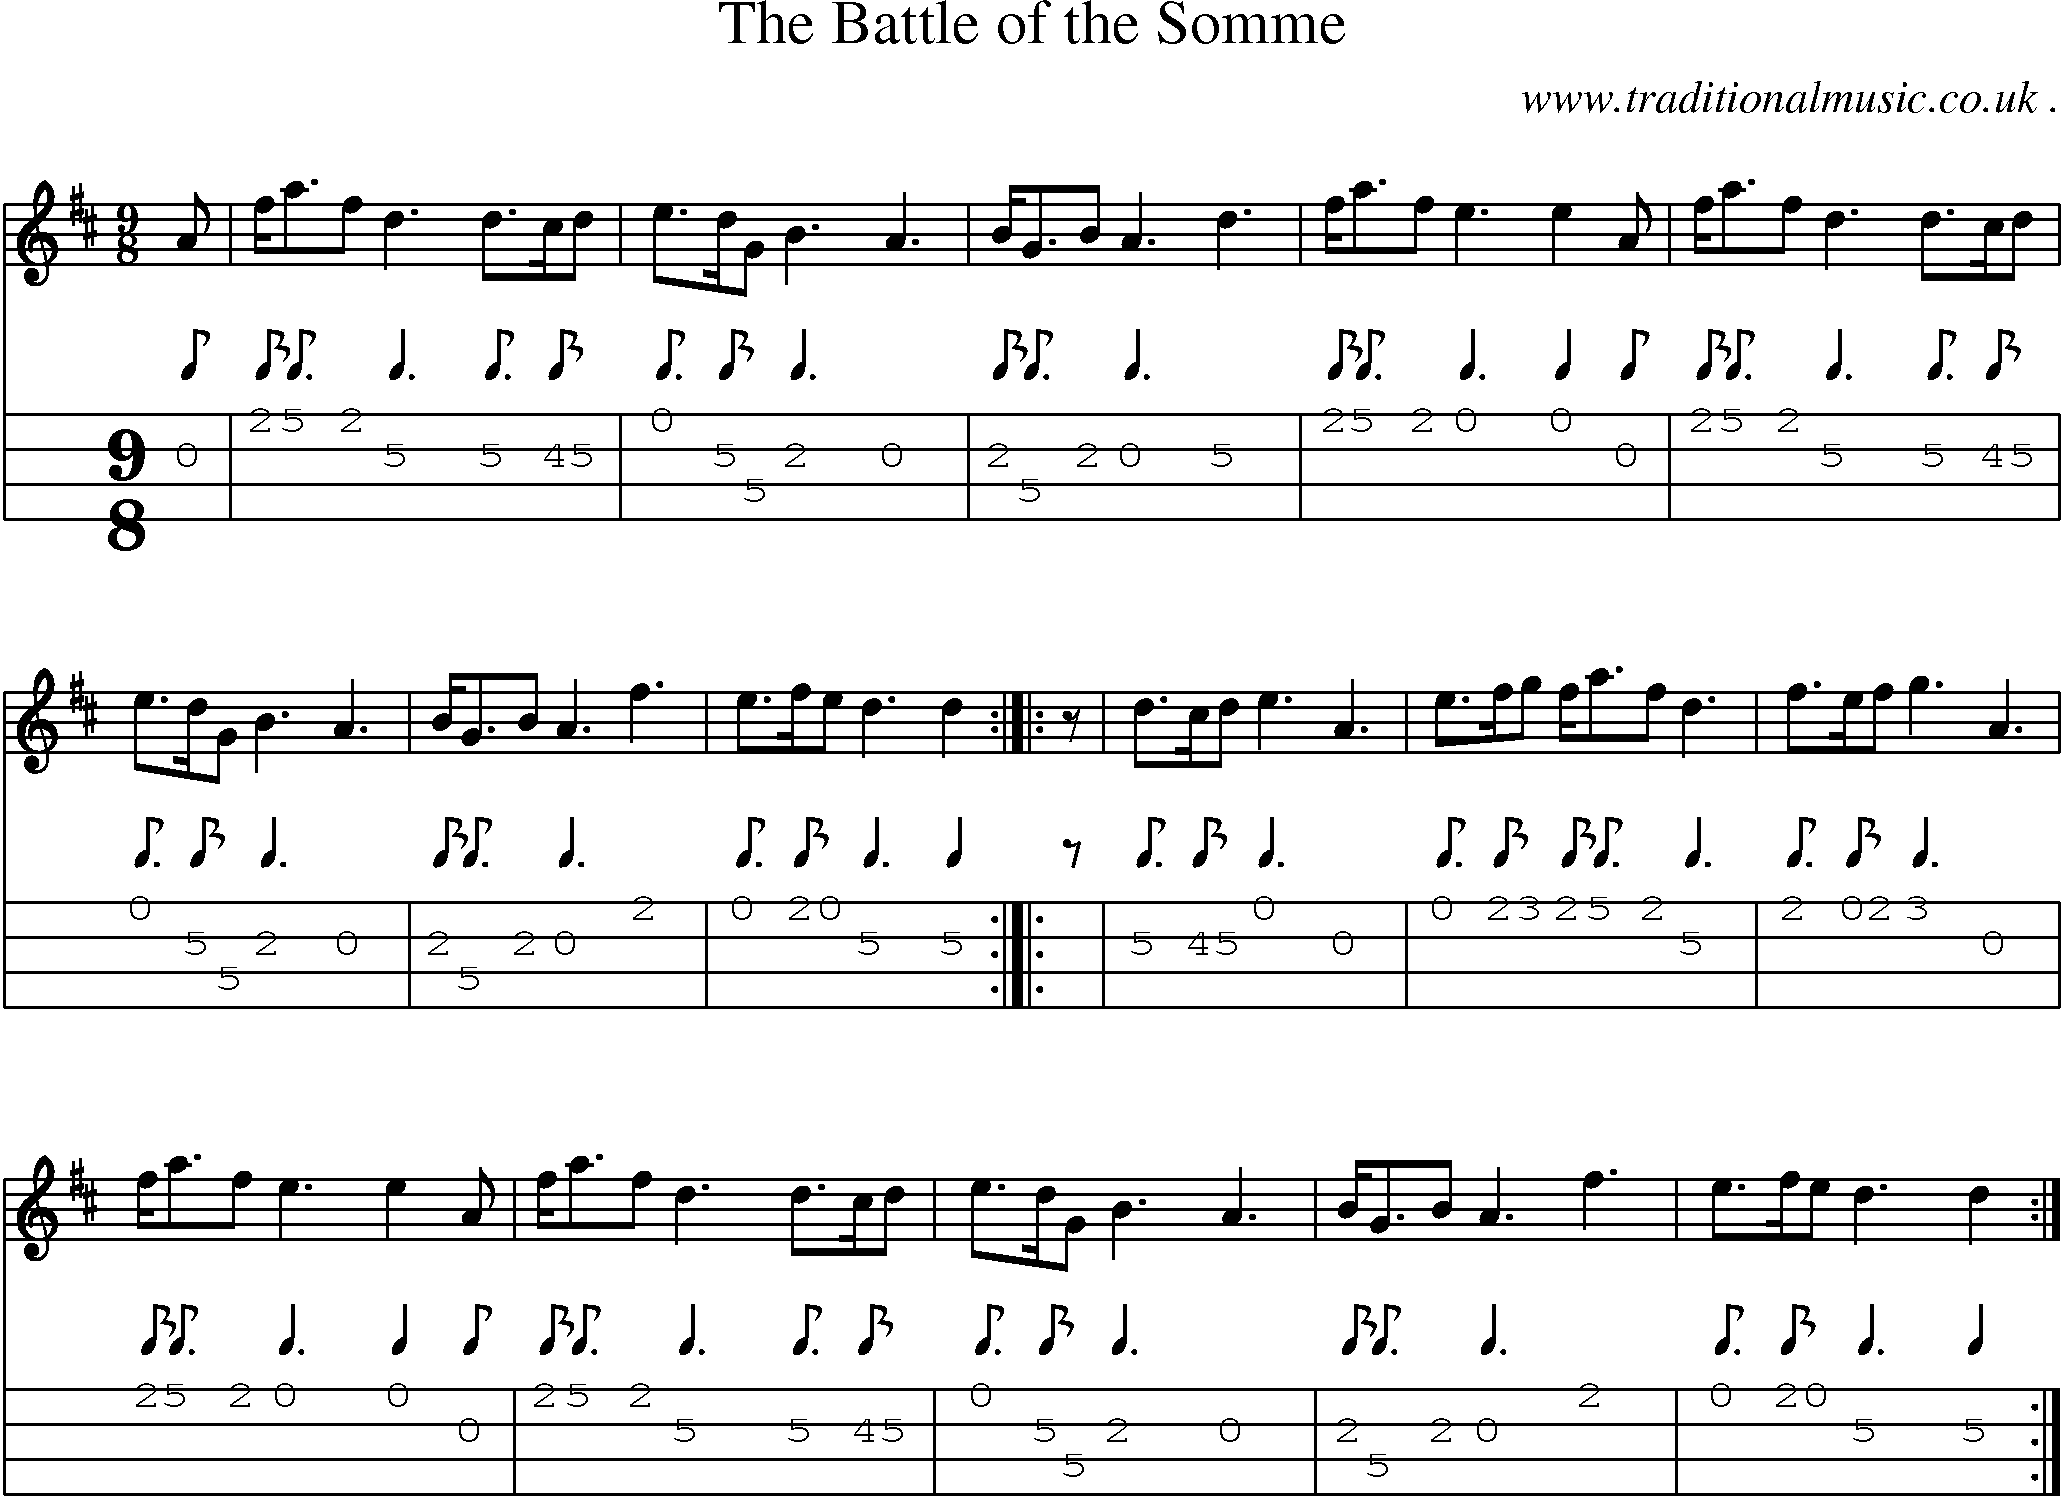 Sheet-music  score, Chords and Mandolin Tabs for The Battle Of The Somme